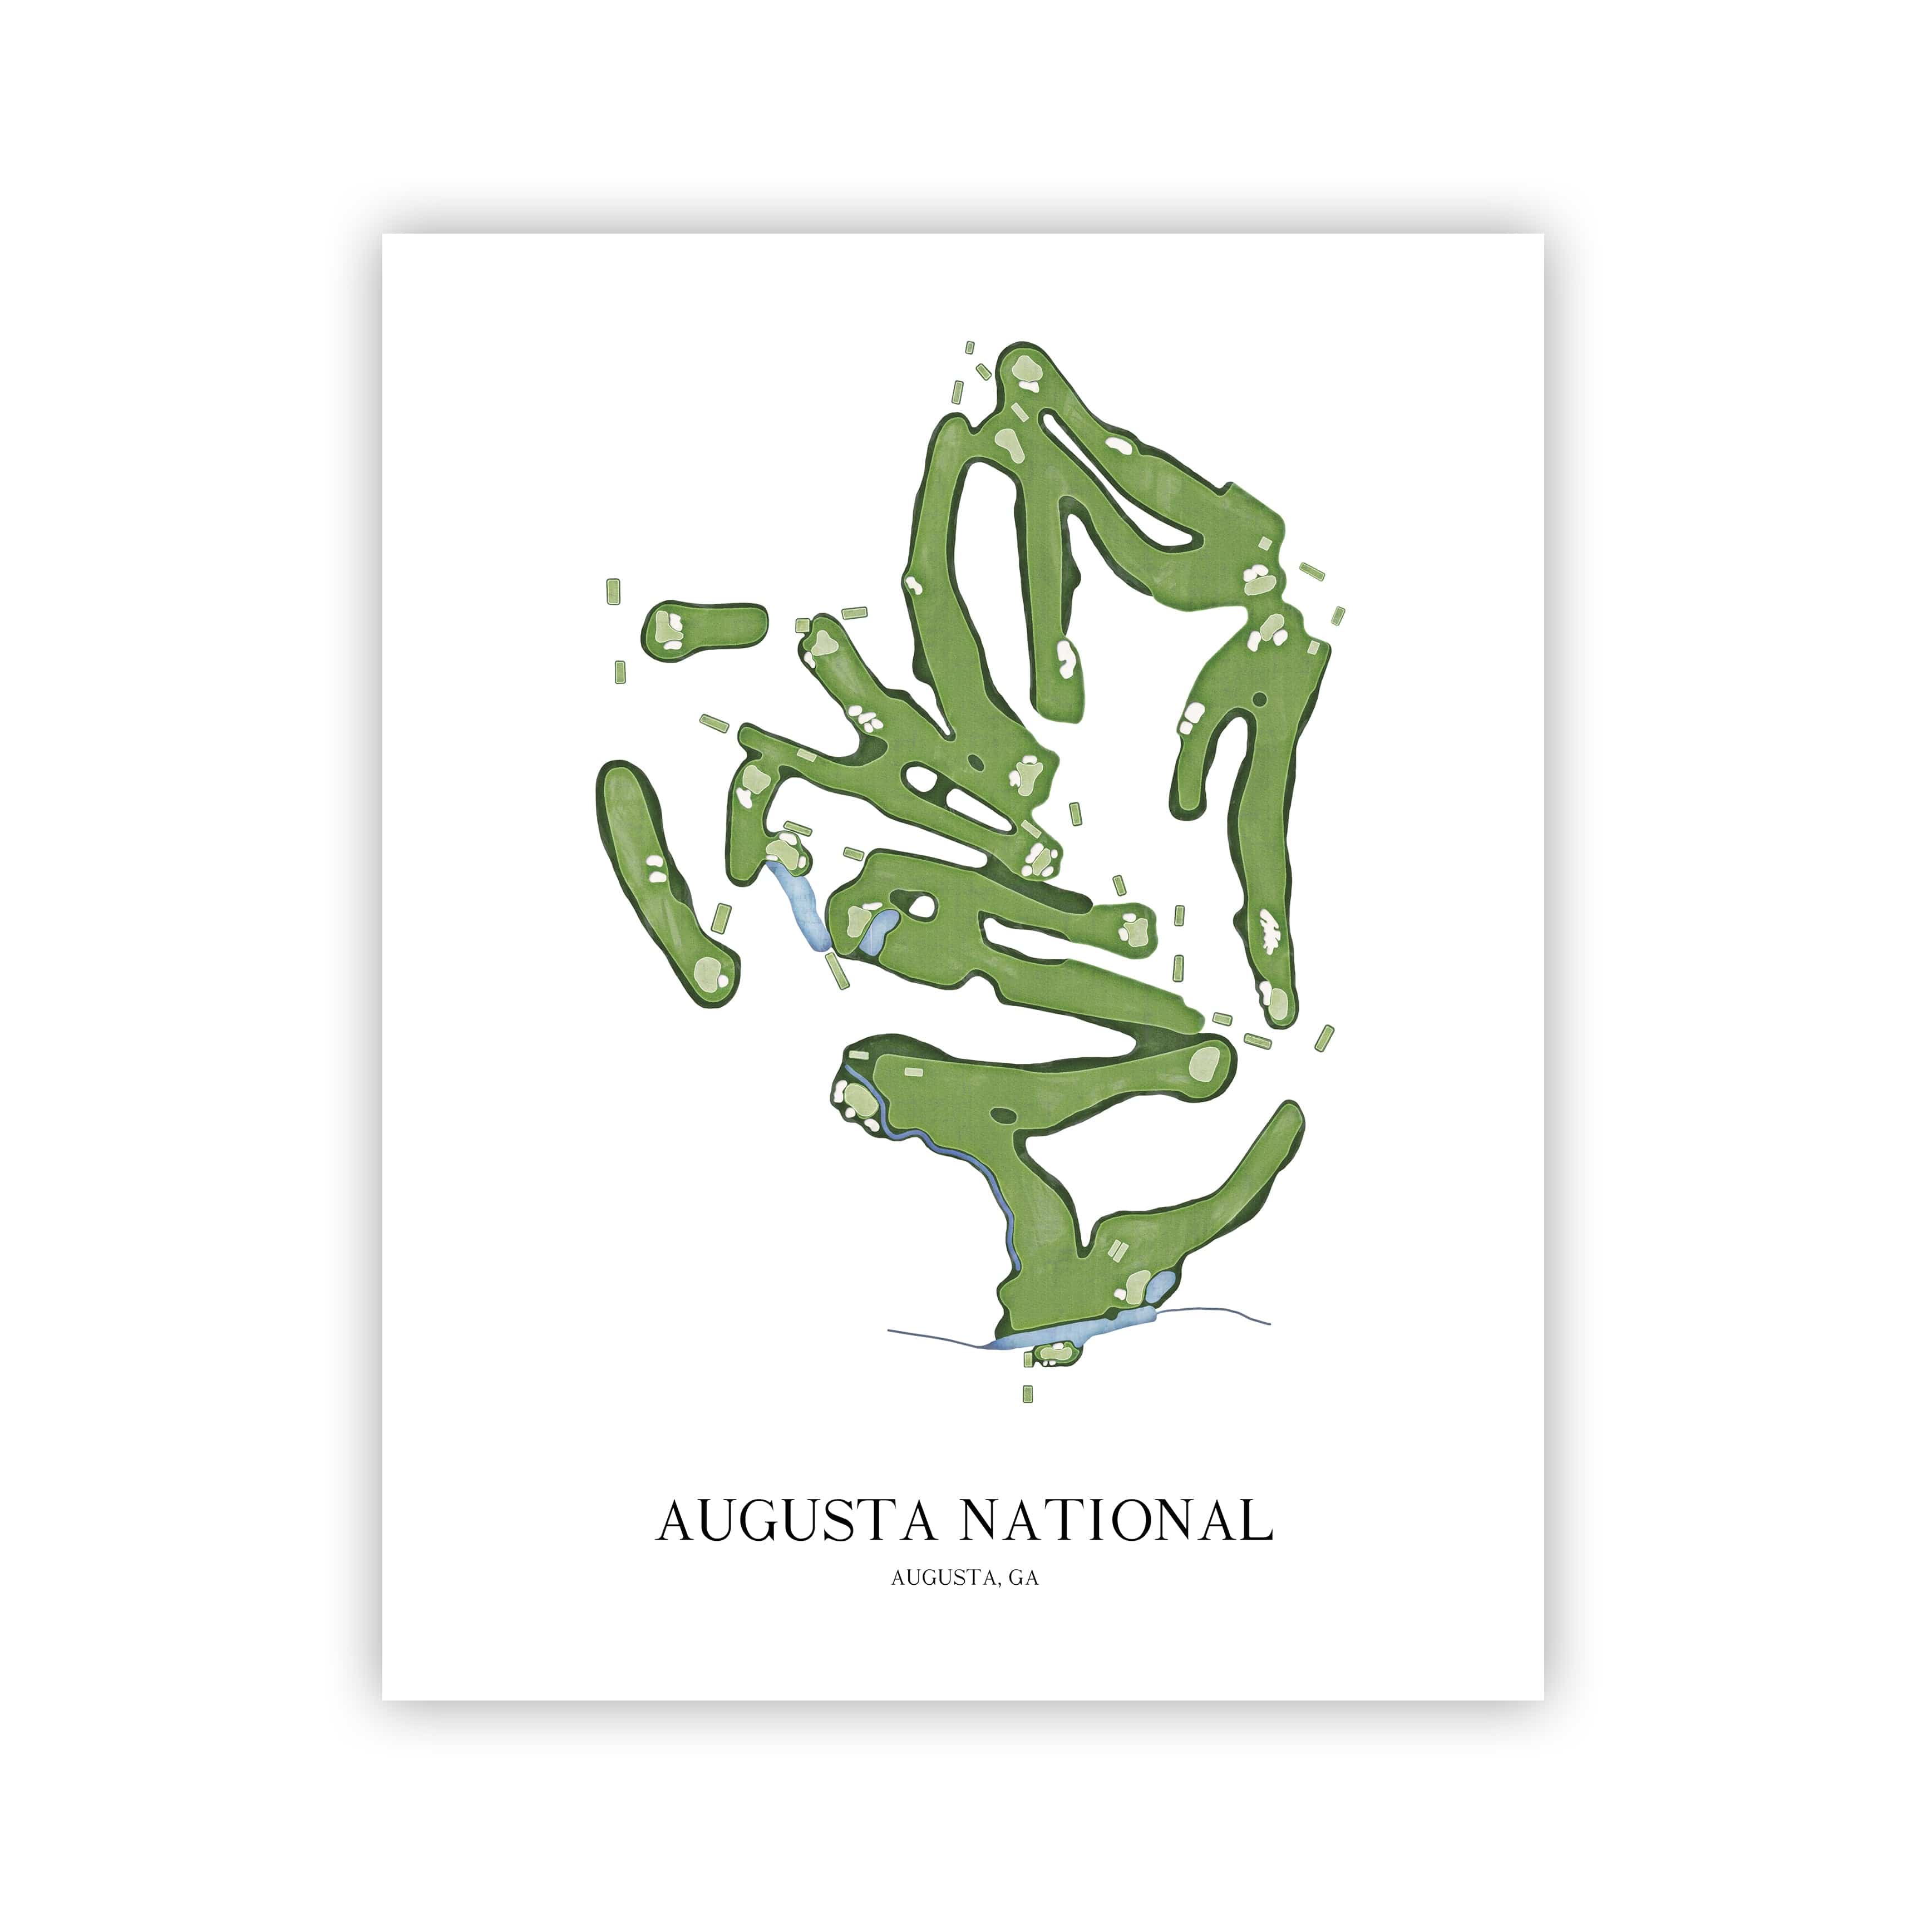 The 19th Hole Golf Shop - Golf Course Prints -  8" x 10" / No Frame Augusta National Golf Course Map